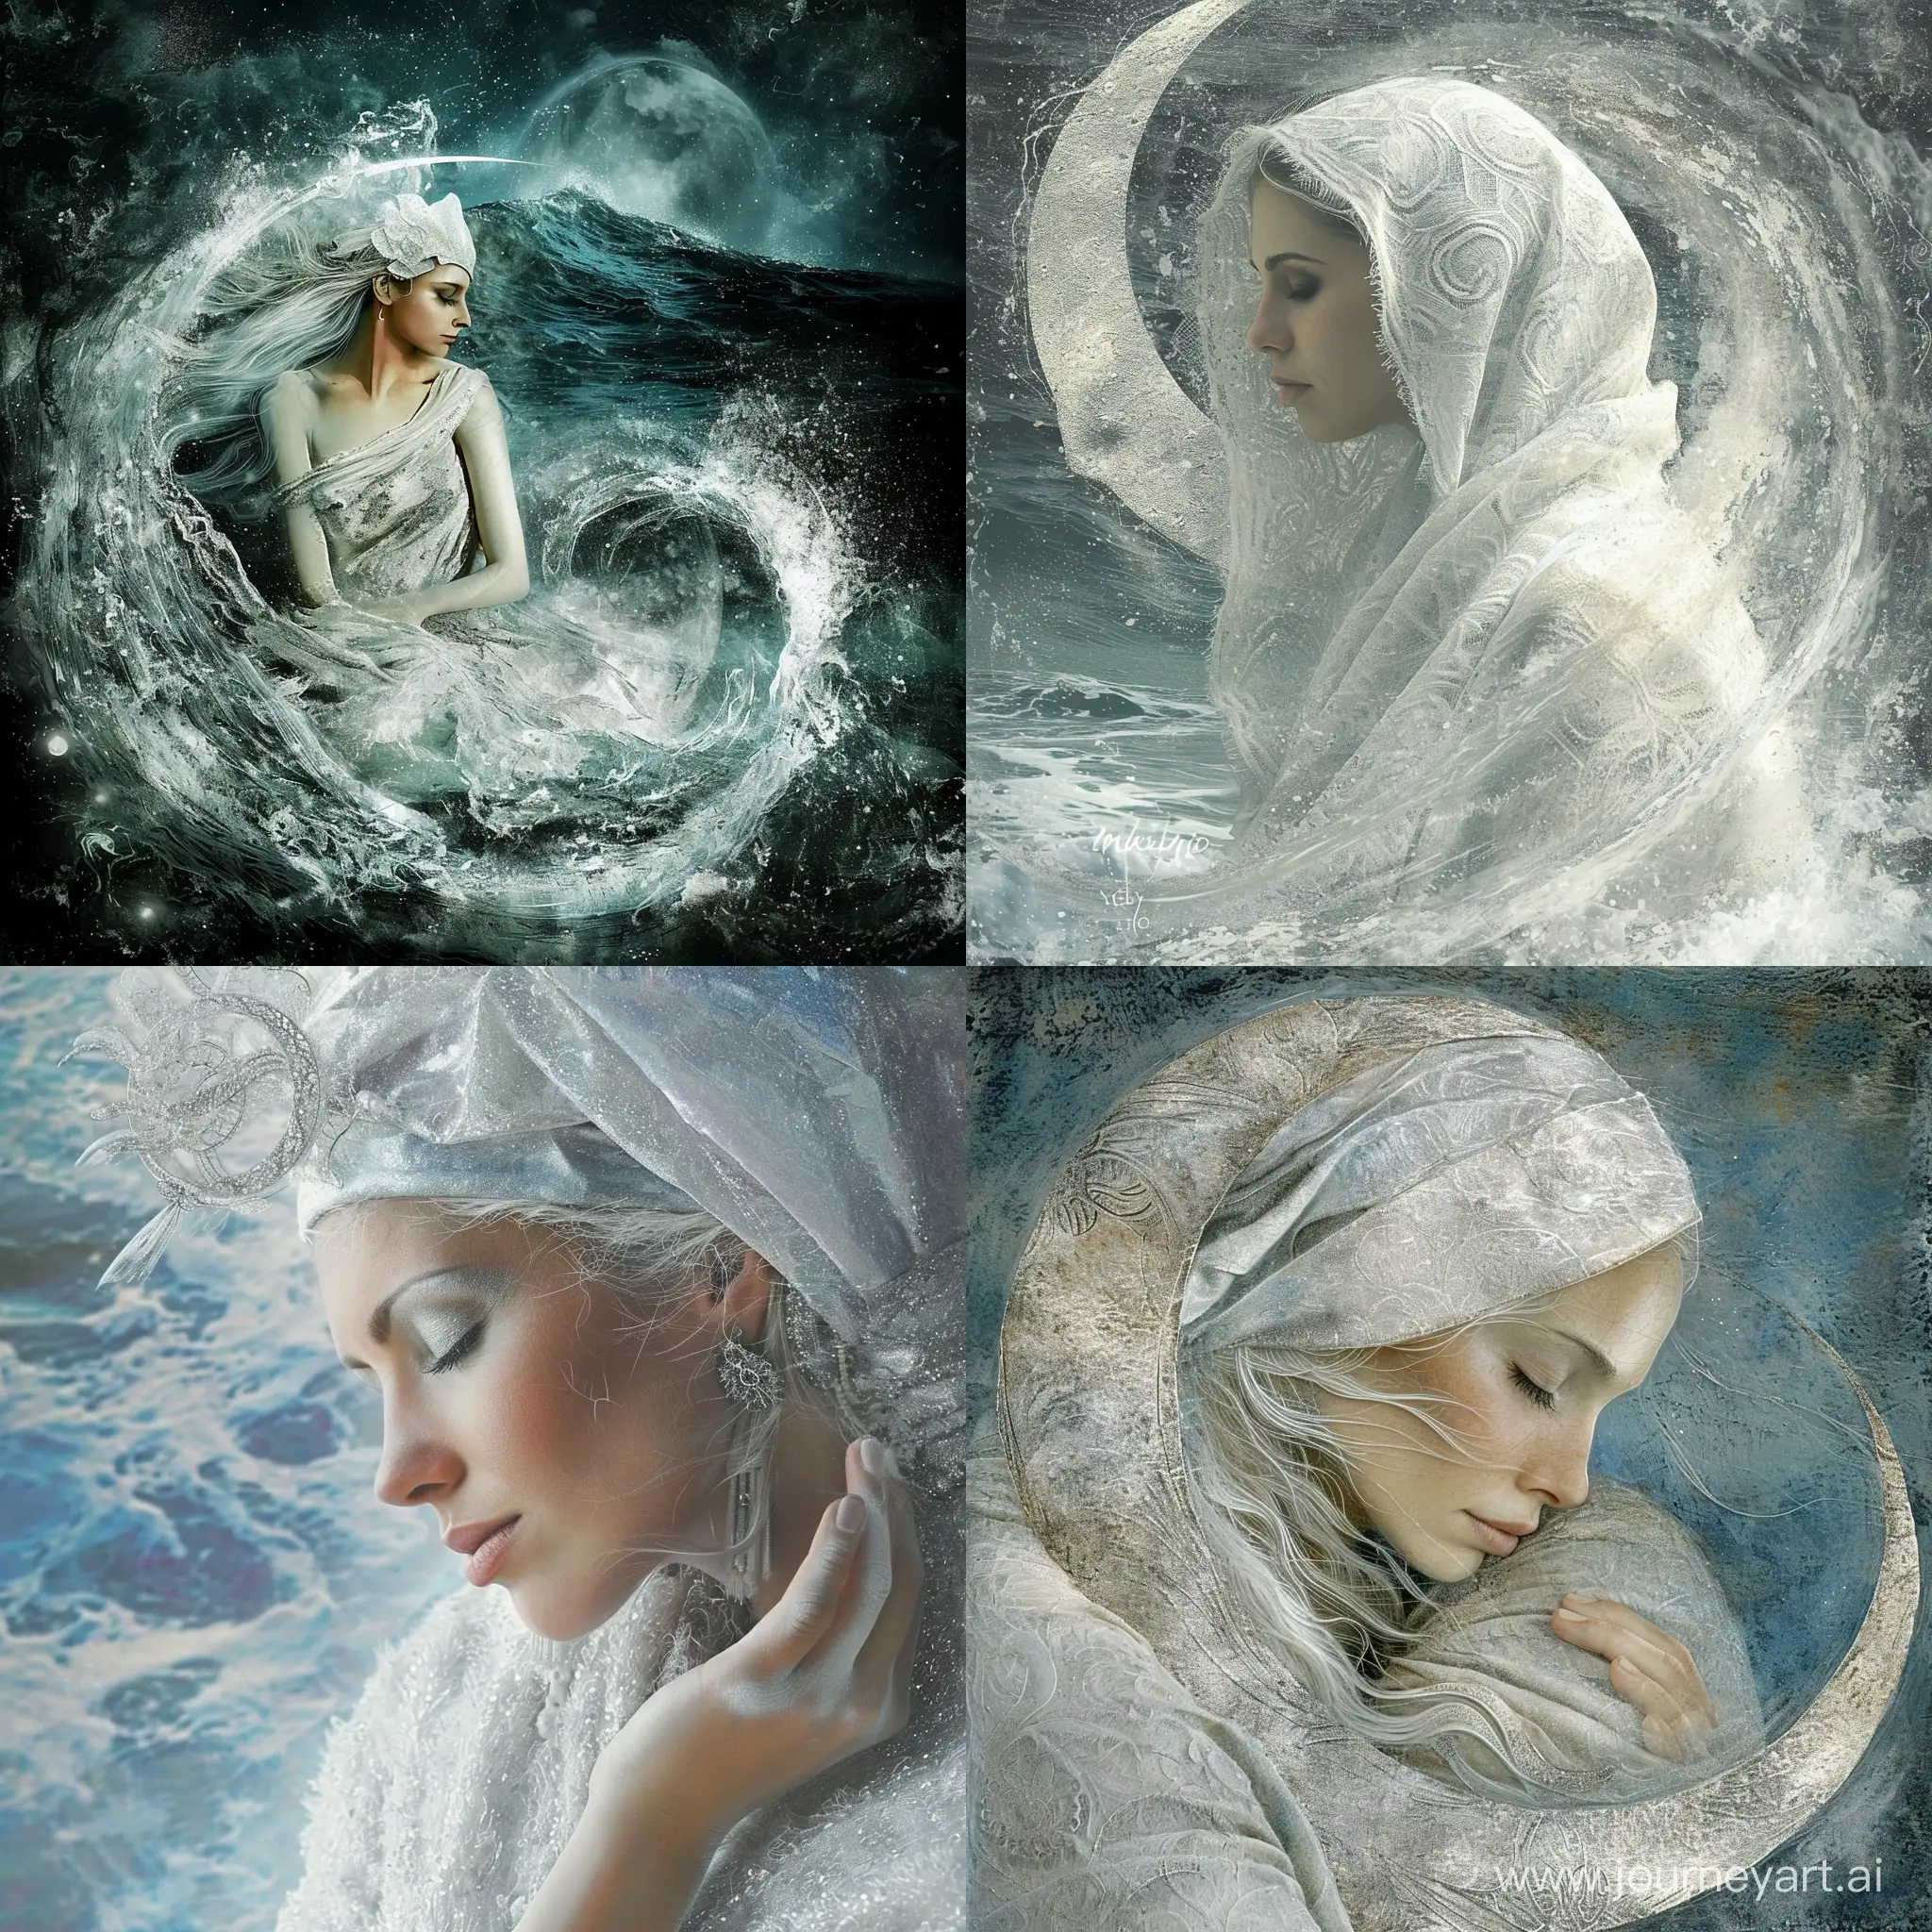 The white Cancer woman is a lunar guardian, enveloped in the silvery glow of moonlight. Embracing the emotional depths, they create cosmic ebbs and flows and become a celestial ocean whispering universal secrets. In the mystical waters, Cancer is a cosmic oracle, reading the celestial currents and guiding others through cosmic mysteries